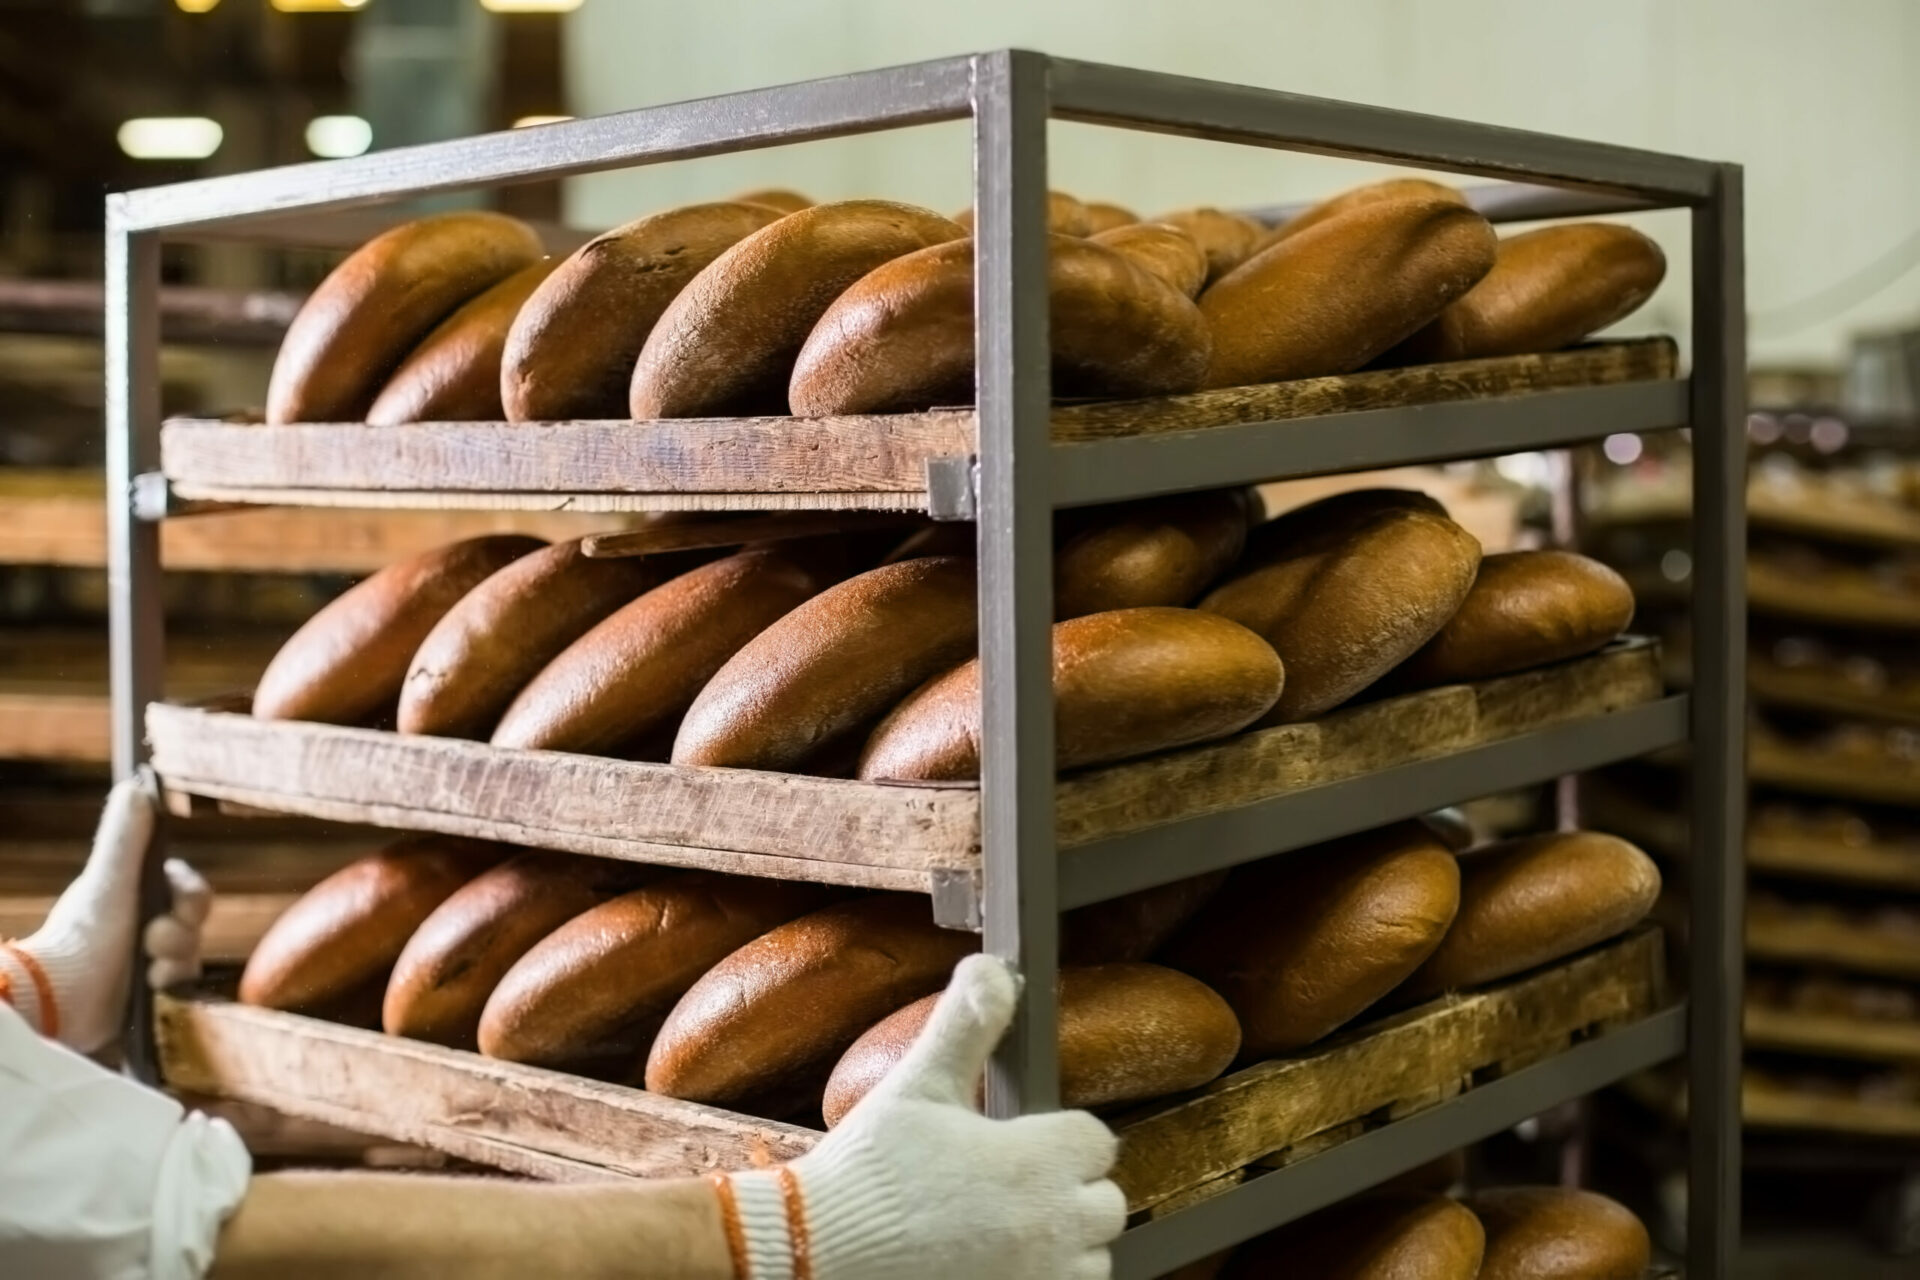 Industrial bakery with fresh bread on racks. Worker at food factory. Healthy pastry production.